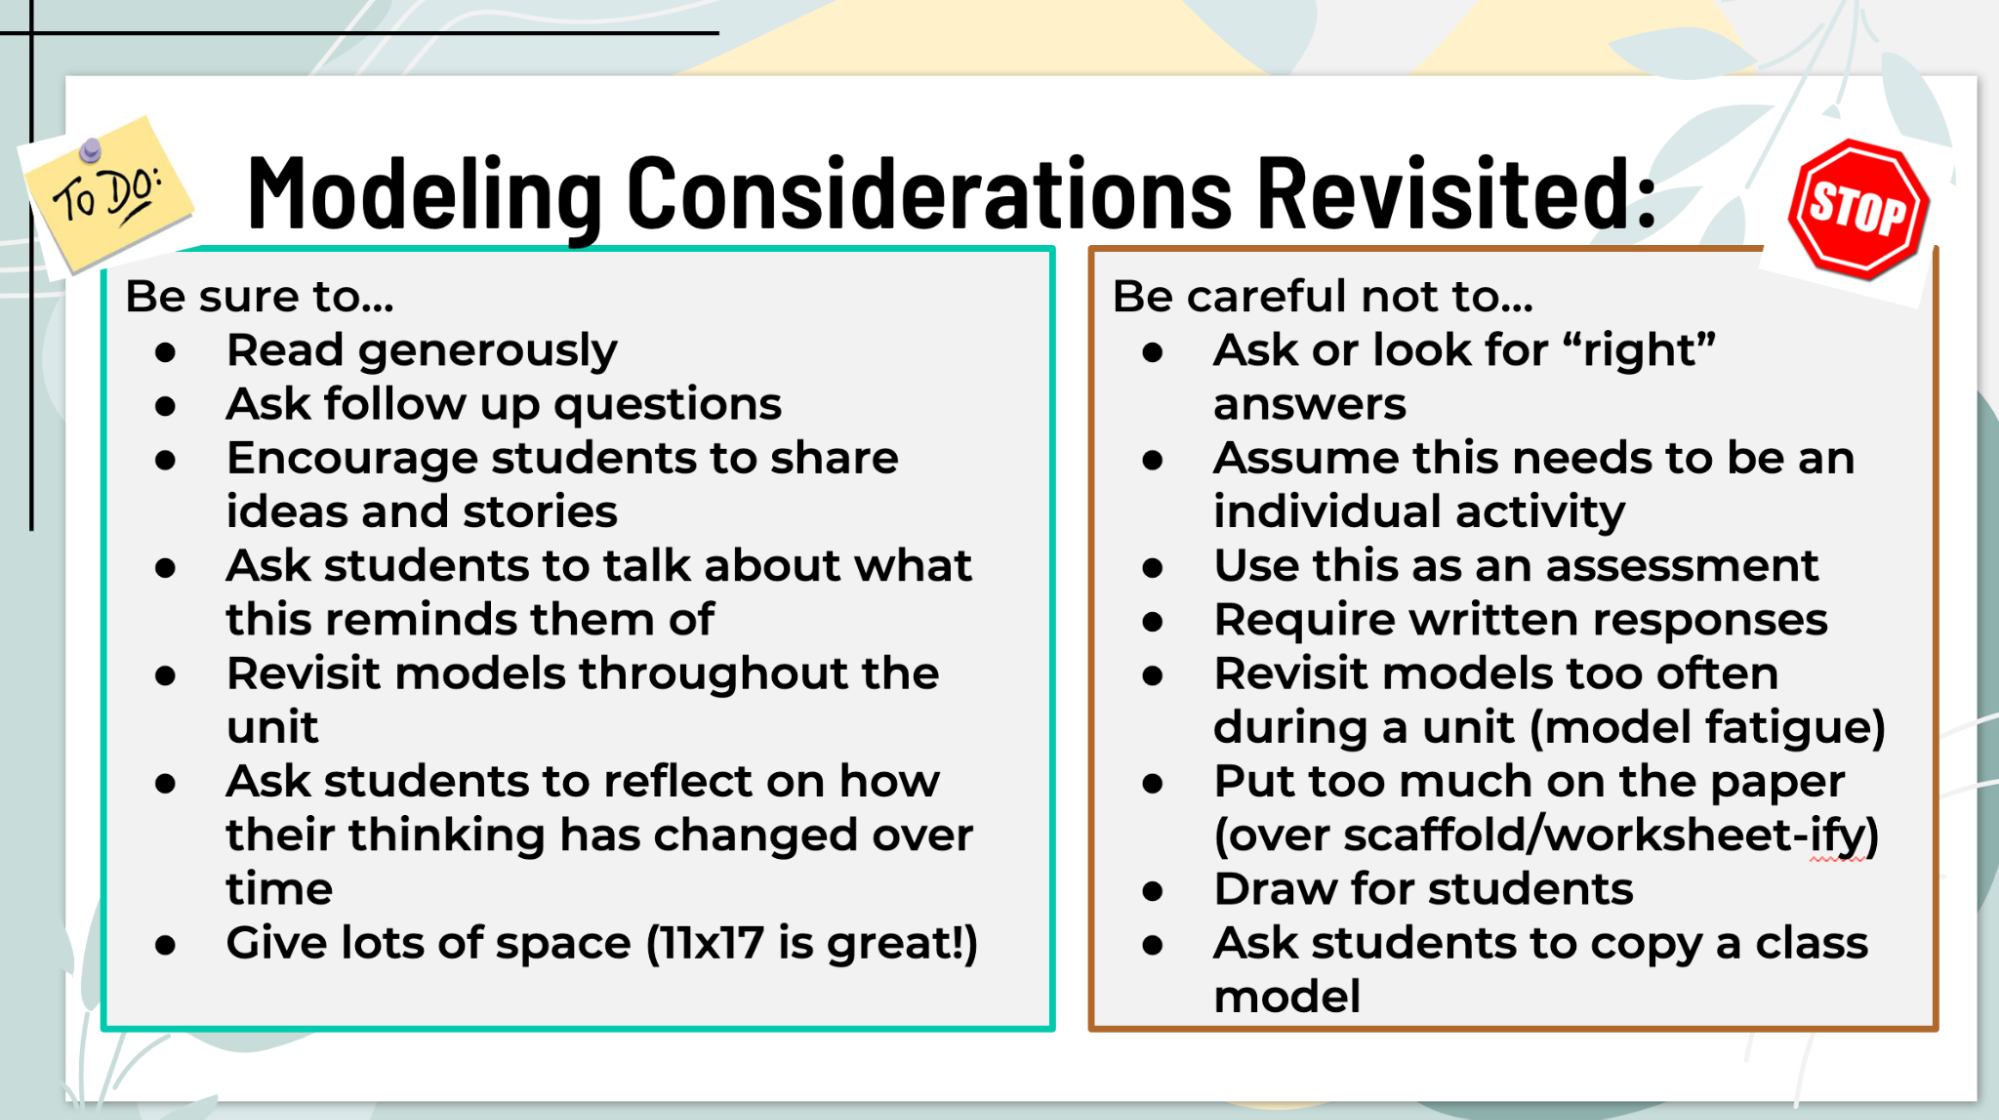 Explains modeling considerations to be revisited. Modeling Considerations Revisited: Be sure to... -Read generously -Ask follow up questions -Encourage students to share ideas and stories -Ask students to talk about what this reminds them of -Revisit models throughout the unit -Ask students to reflect on how their thinking has changed over time -Give lots of space (11x17 is great!) Be careful not to... -Ask or look for "right" answers -Assume this needs to be an individual activity -Use this as an assessment -Require written responses -Revisit models too often during a unit (model fatigue) -Put too much on the paper (over scaffold/worksheet-ify) -Draw for students -Ask students to copy a class model